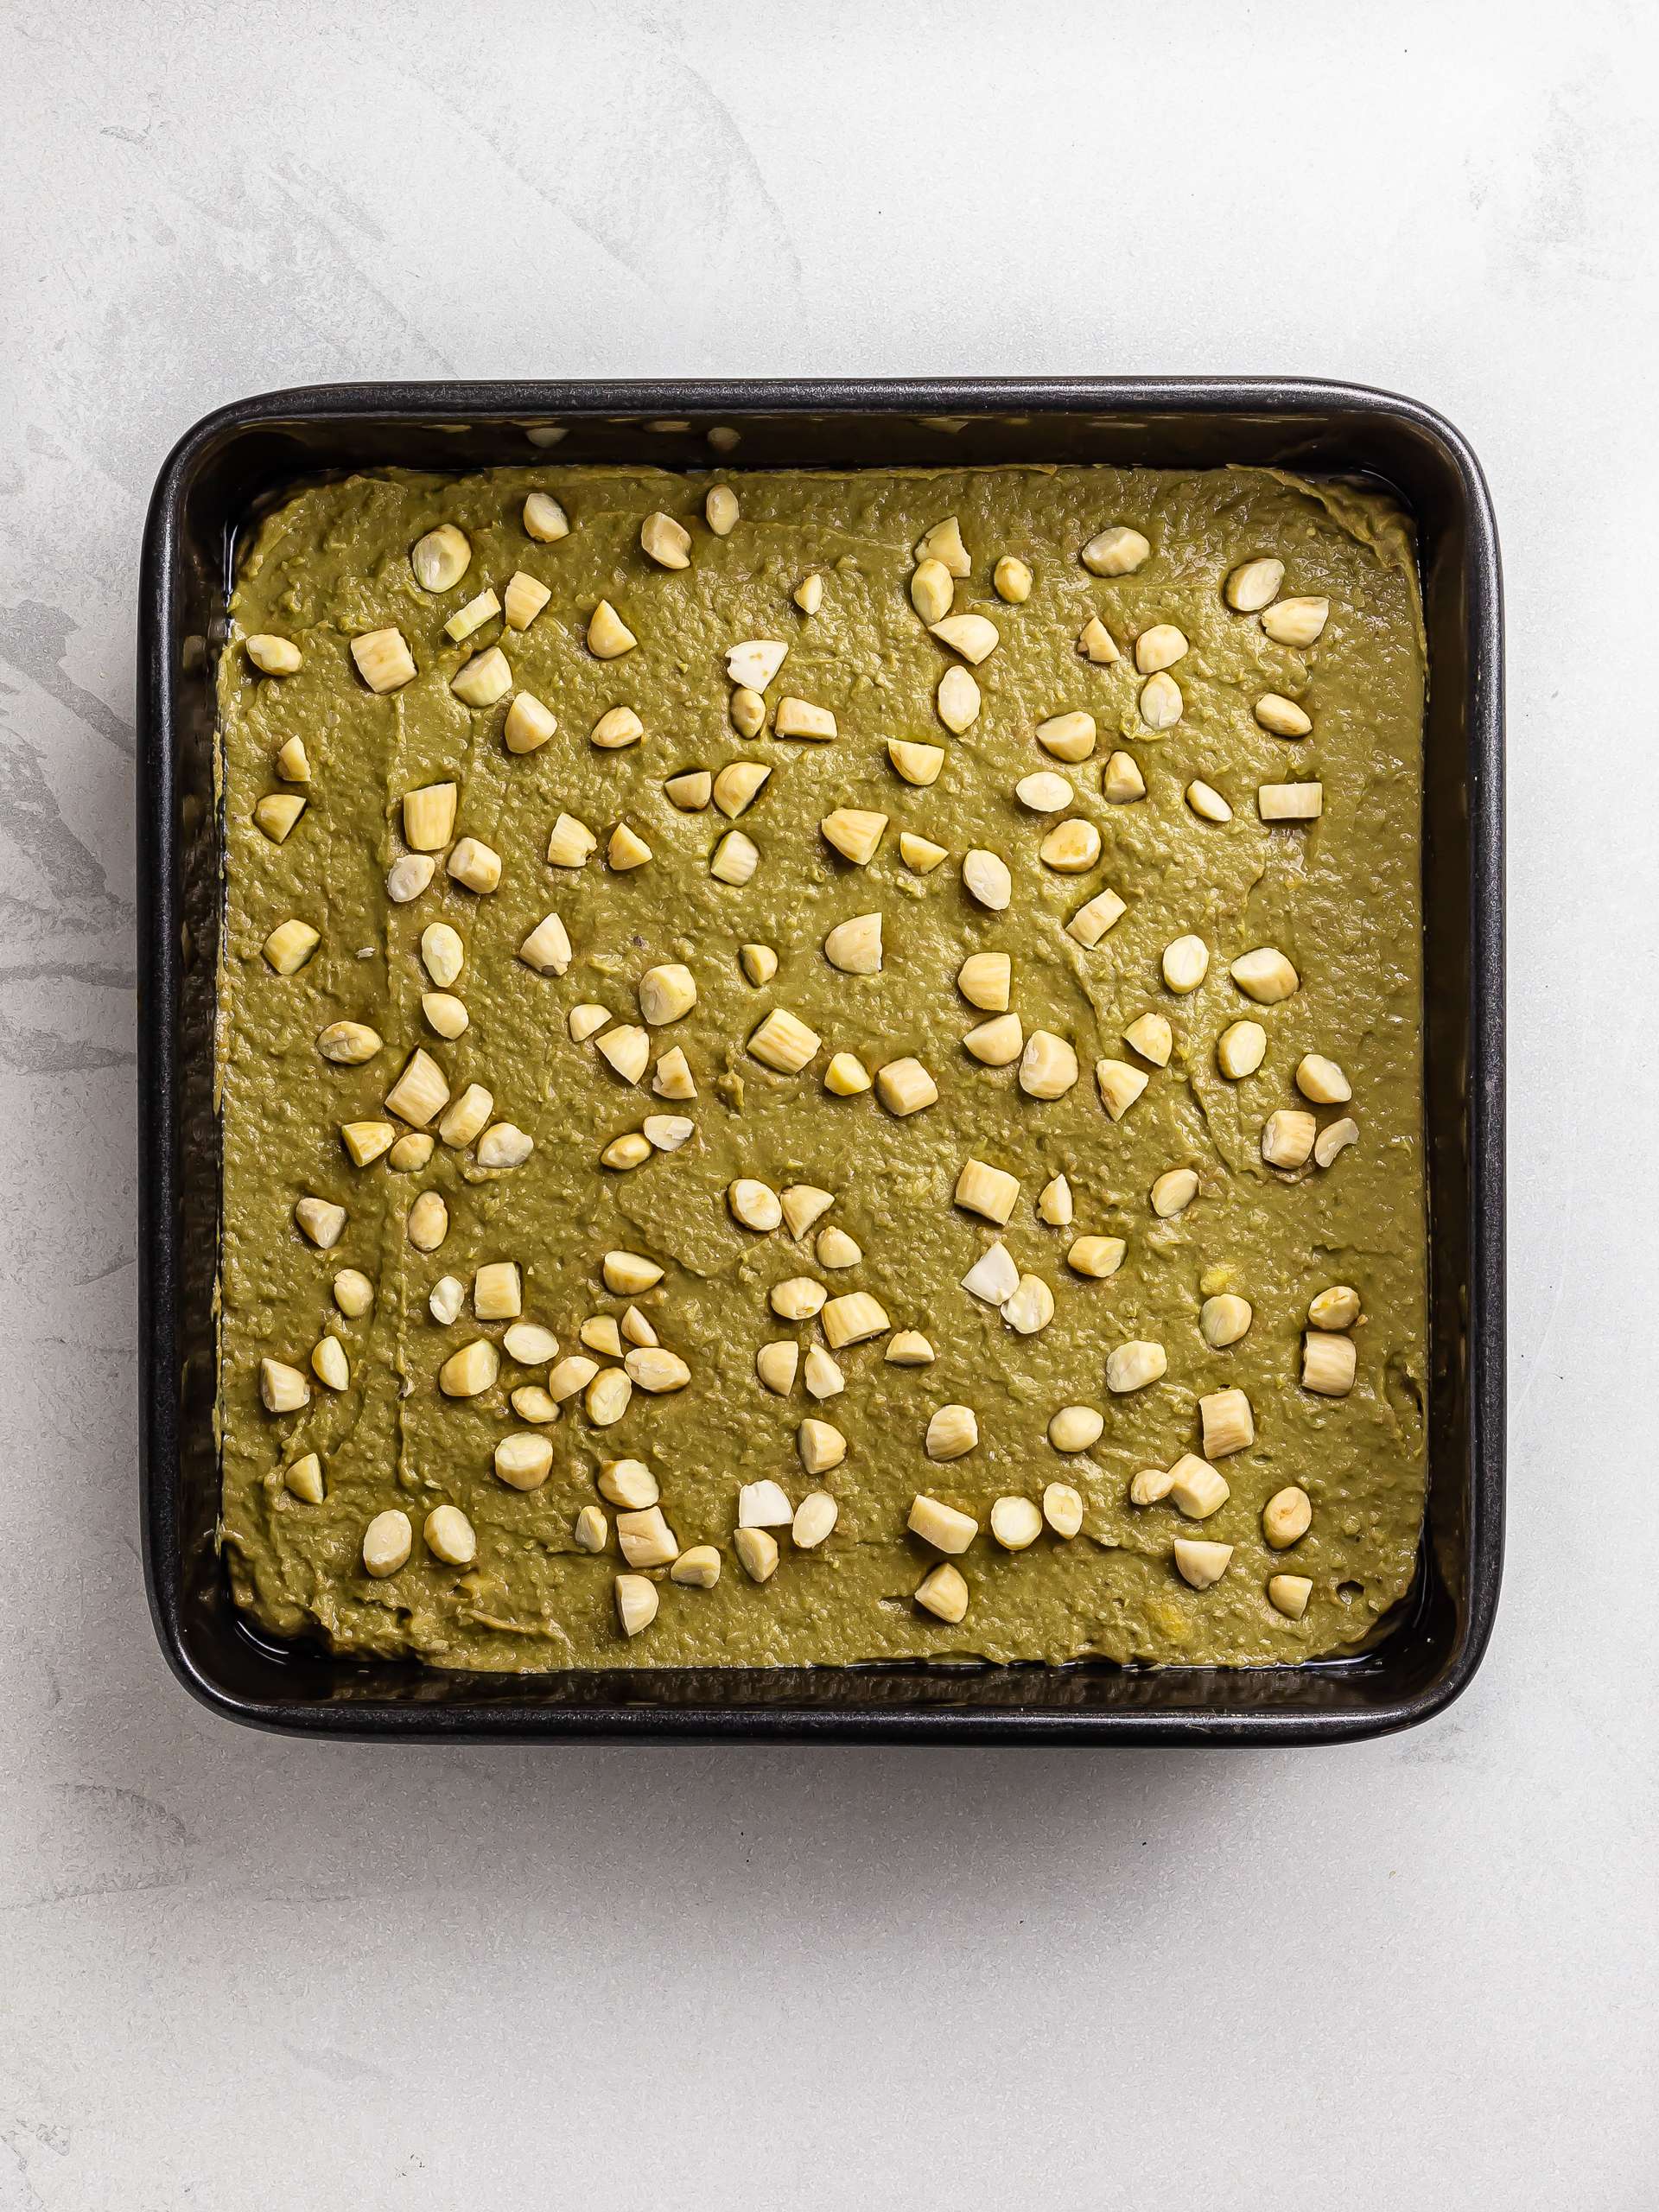 matcha brownies batter in a baking tin topped with almonds